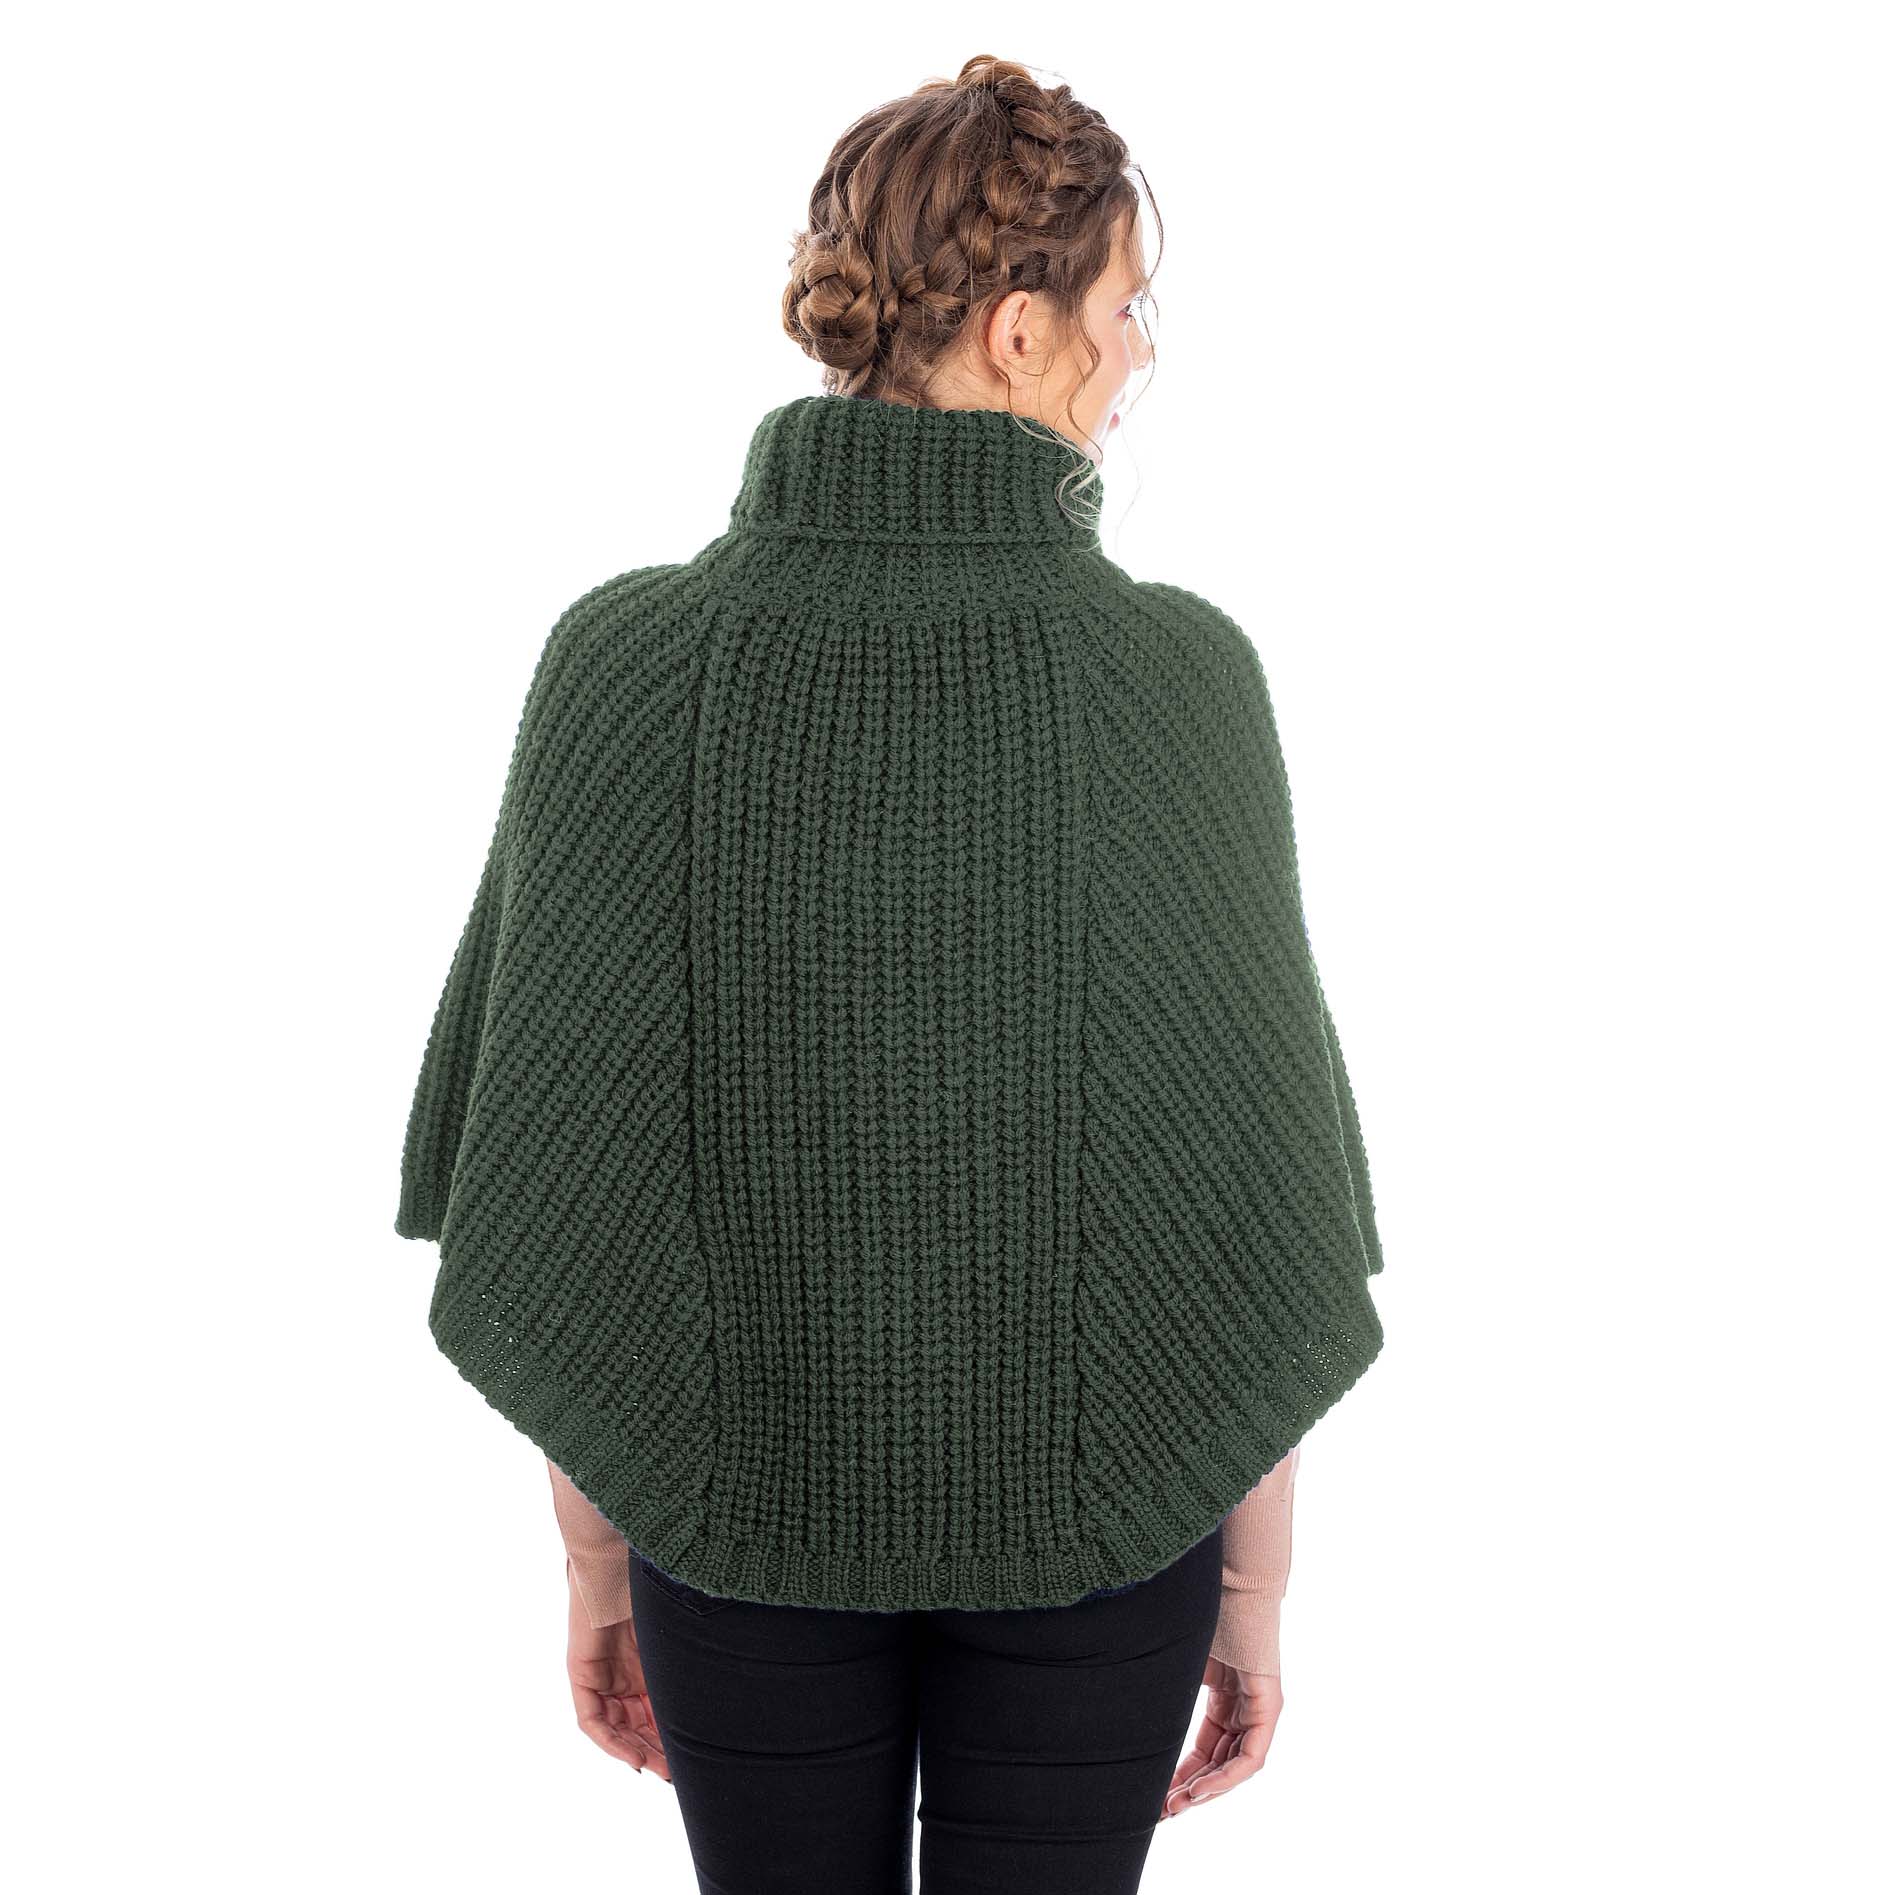 Product image for Irish Shawl | Merino Wool Cable Knit Cowlneck Ladies Poncho